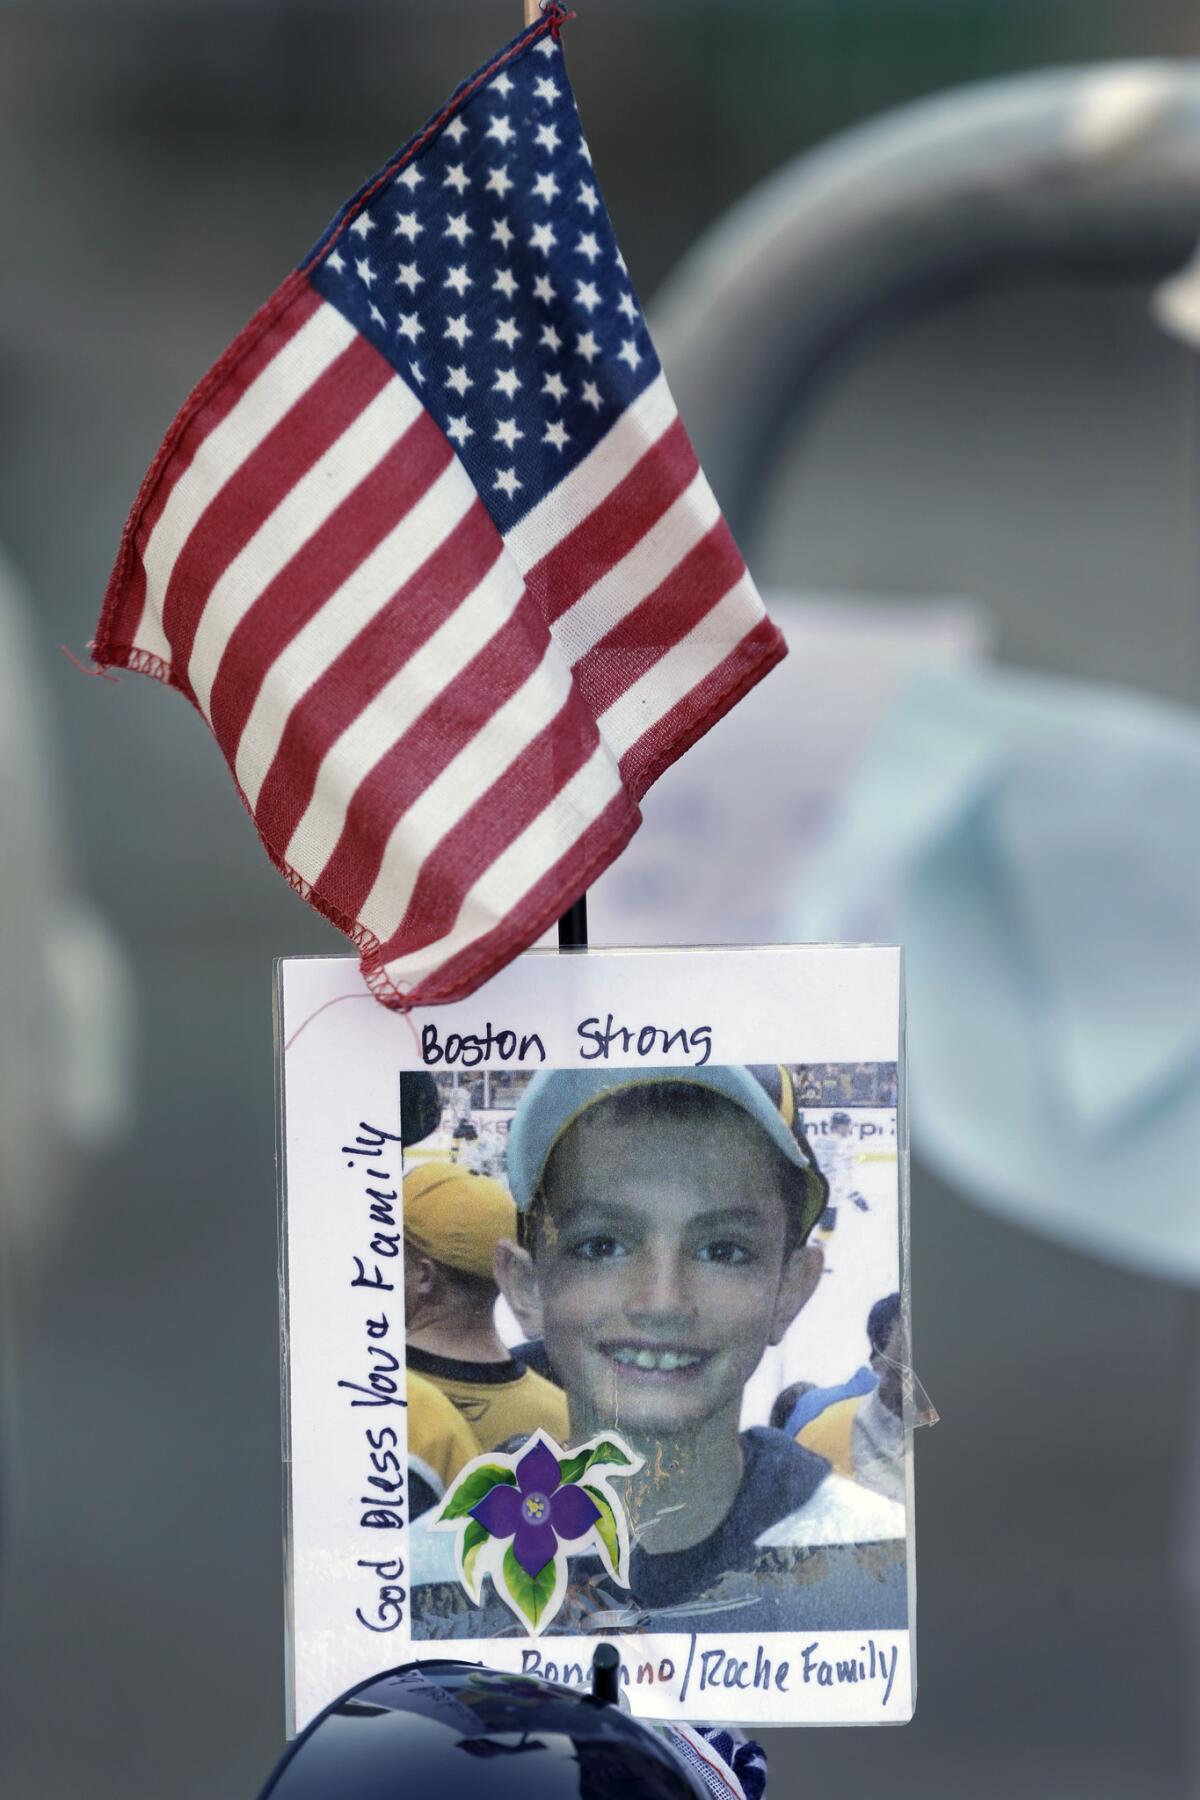 A photograph of bombing victim Martin Richard, 8, is attached to a barricade in Boston. The youngest victim in the bombing was buried Tuesday.